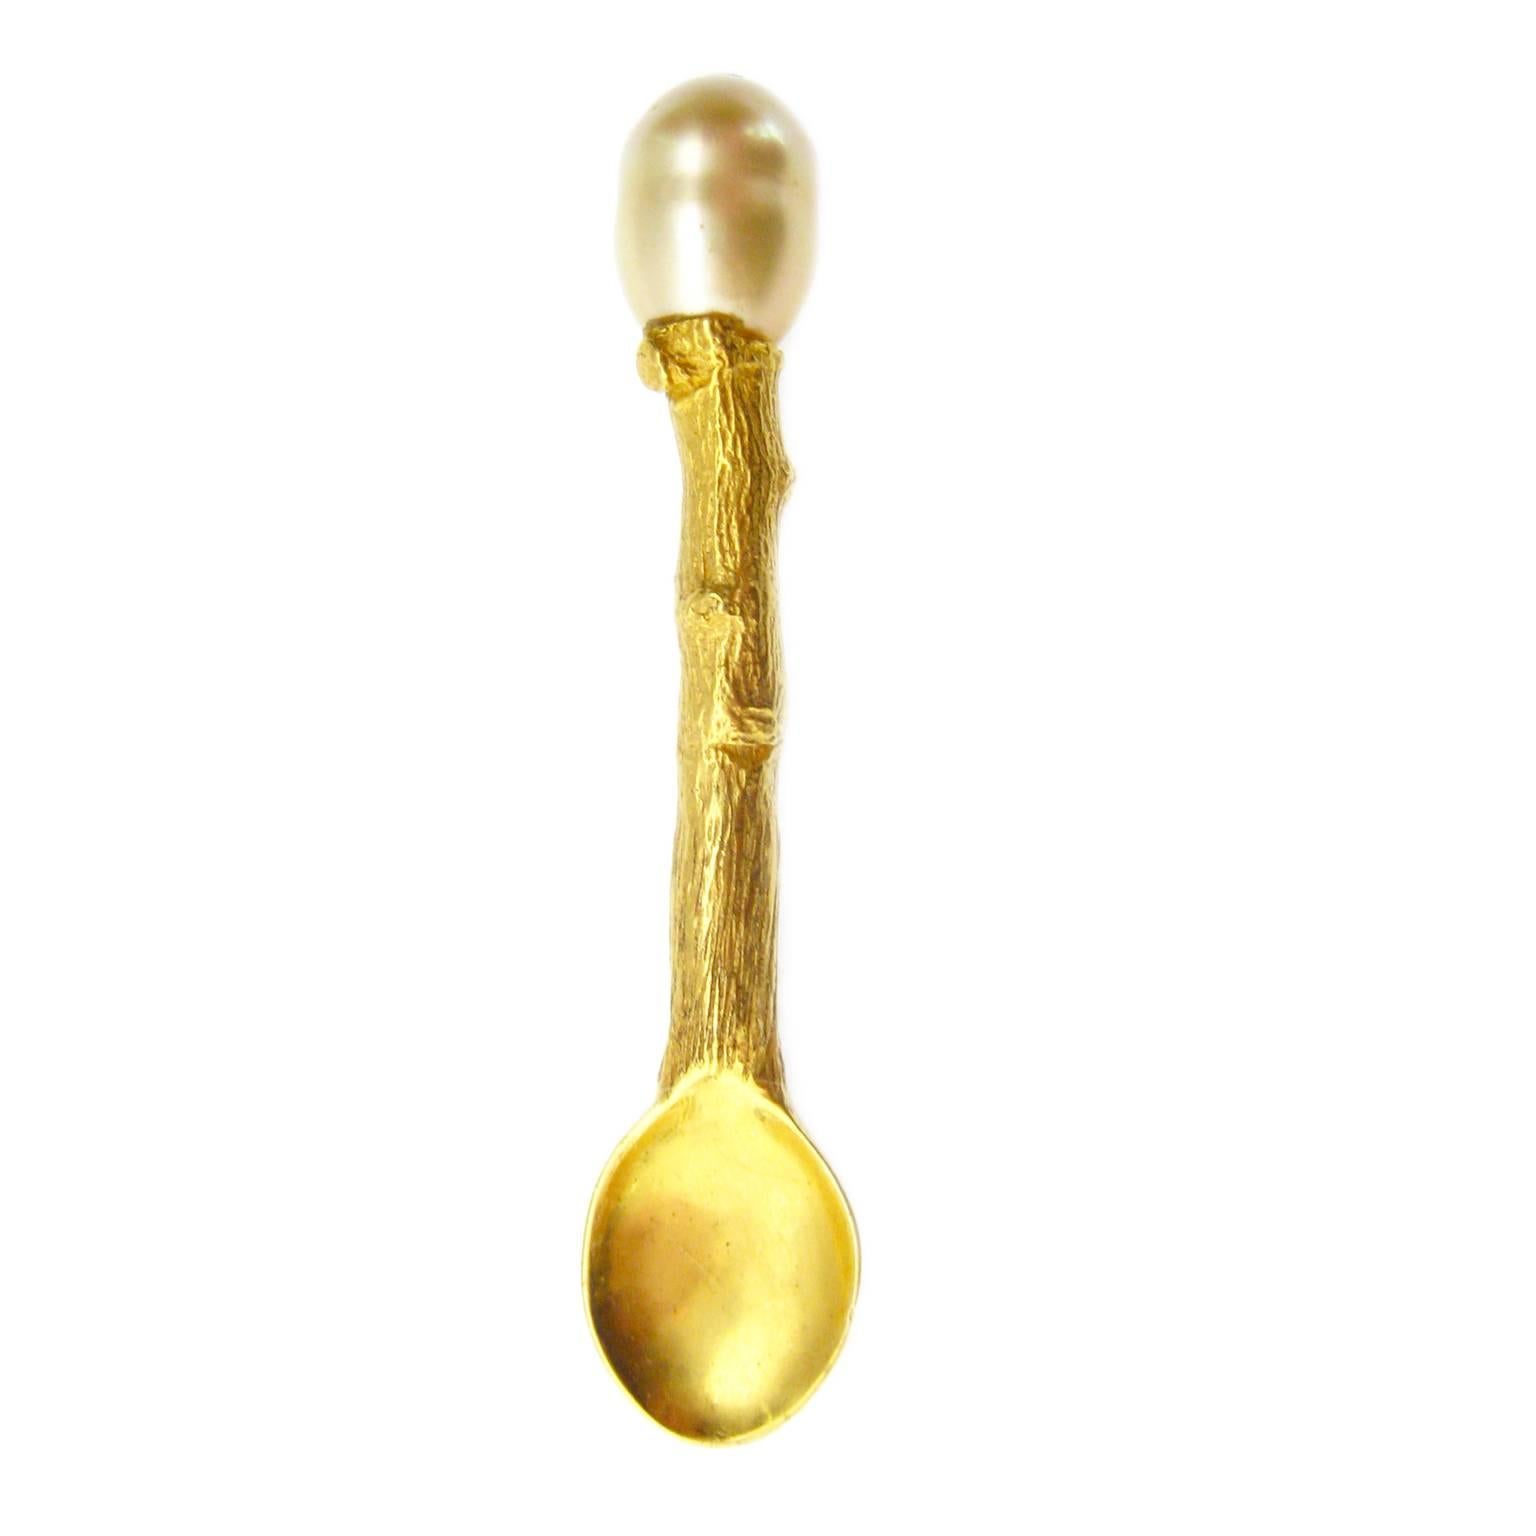 A gorgeous addition to any fashionable table, or accent to the K. Brunini salt cellar, is this delicate salt spoon in 18K yellow gold with a South Sea pearl. From the K. Brunini Object d'Art collection comes this nature-inspired and uniquely